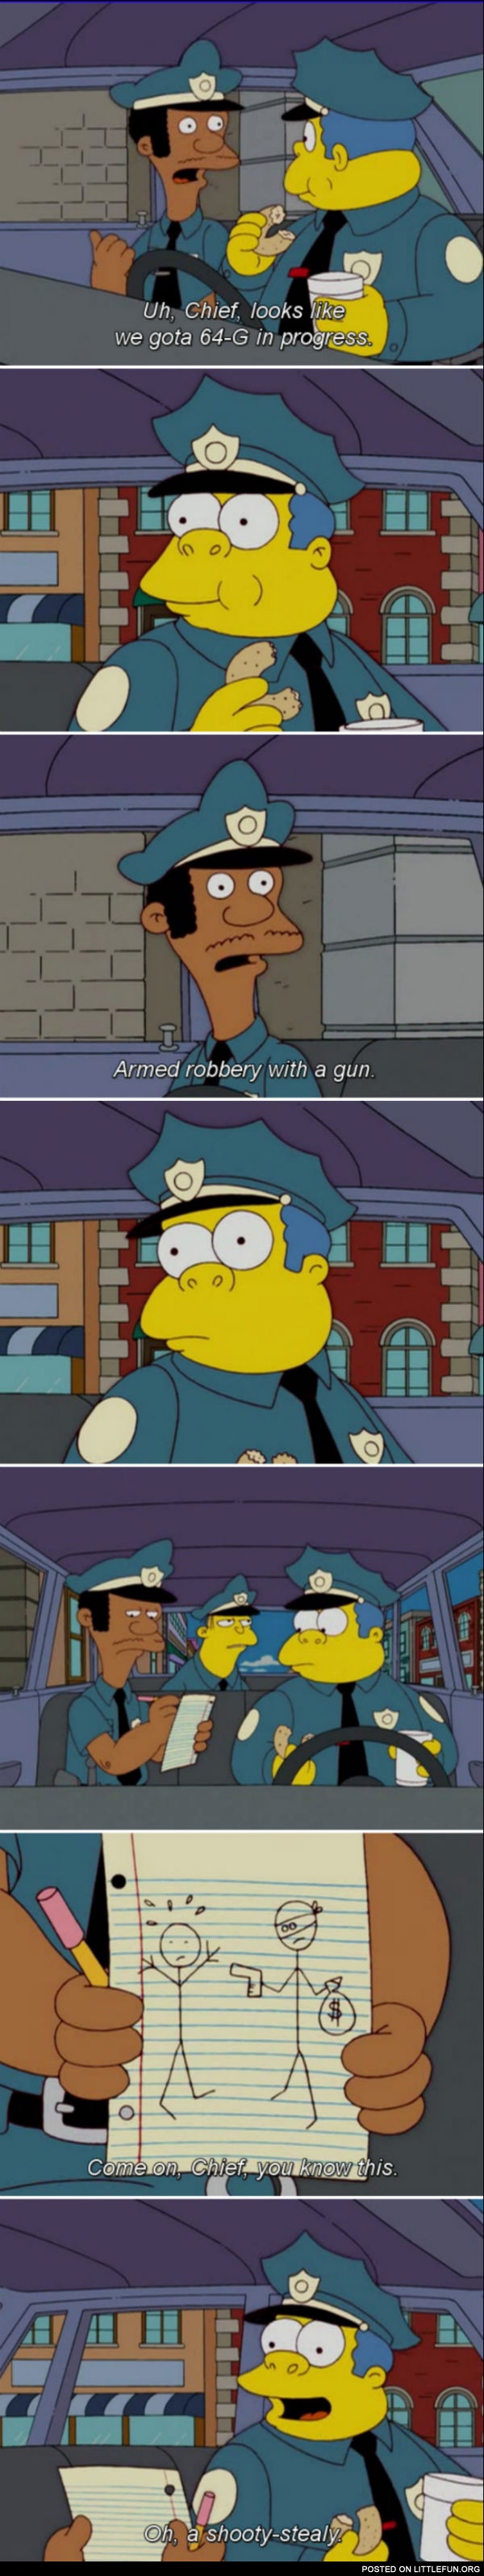 Armed robbery with a gun